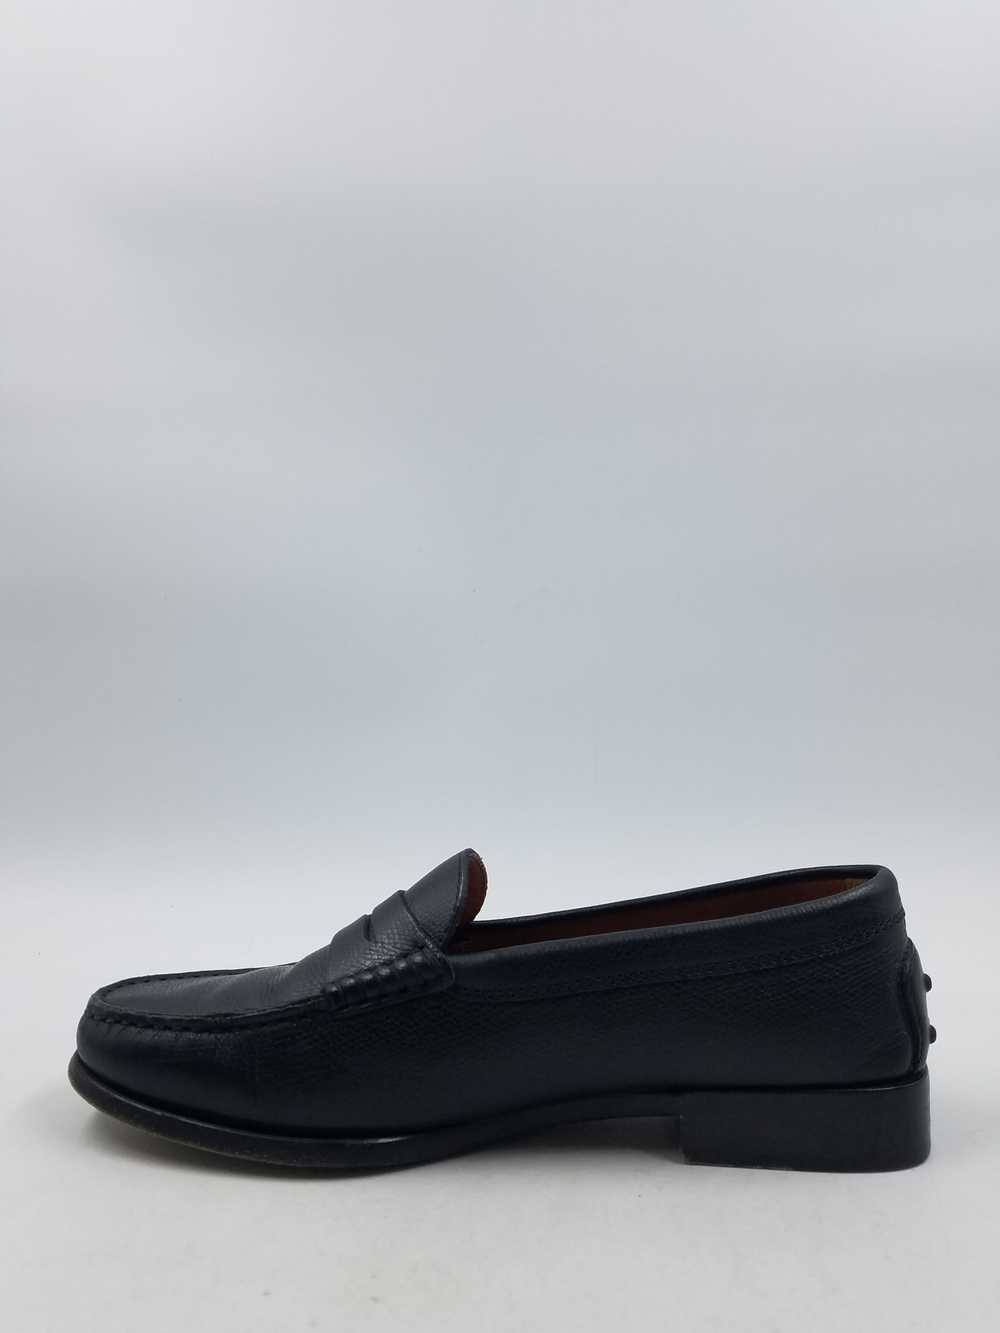 Tod's Black Penny Loafers W 6.5 COA - image 2